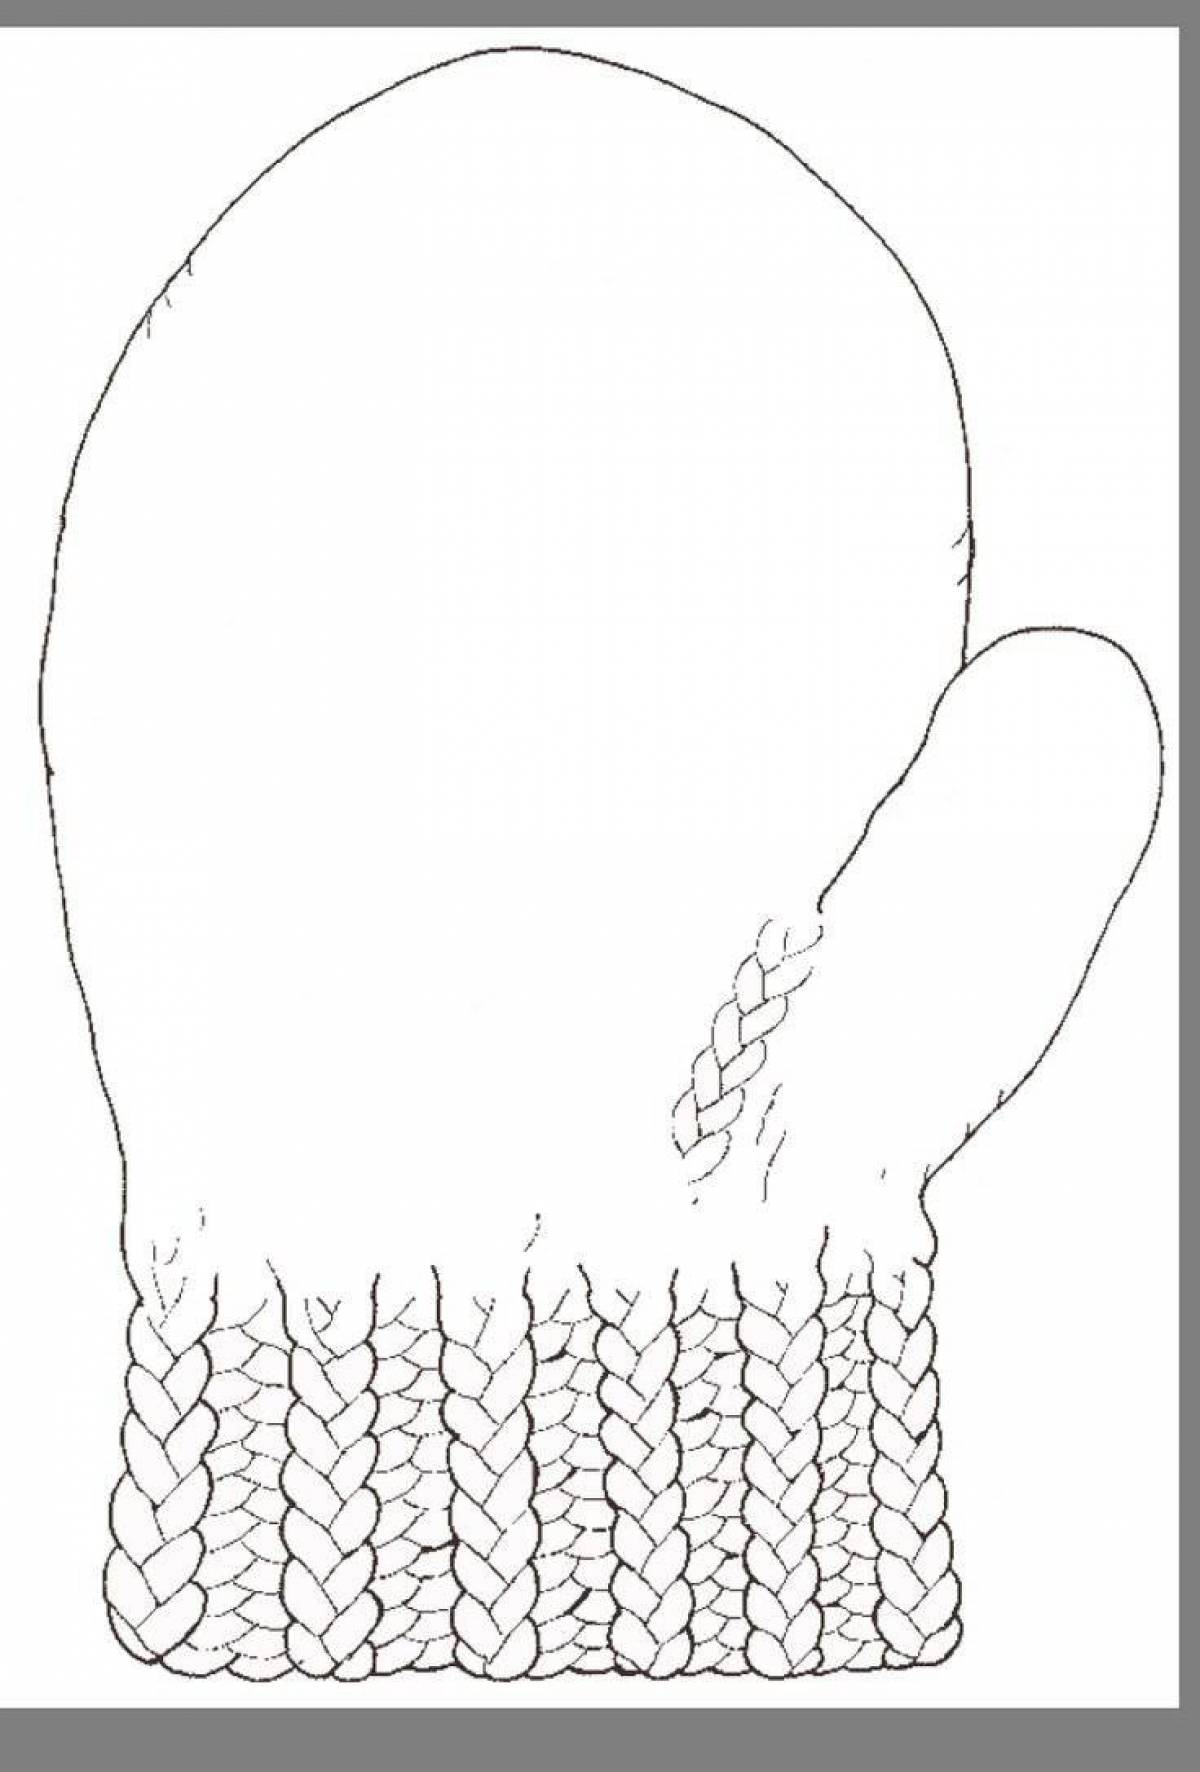 Luminous mitten coloring page